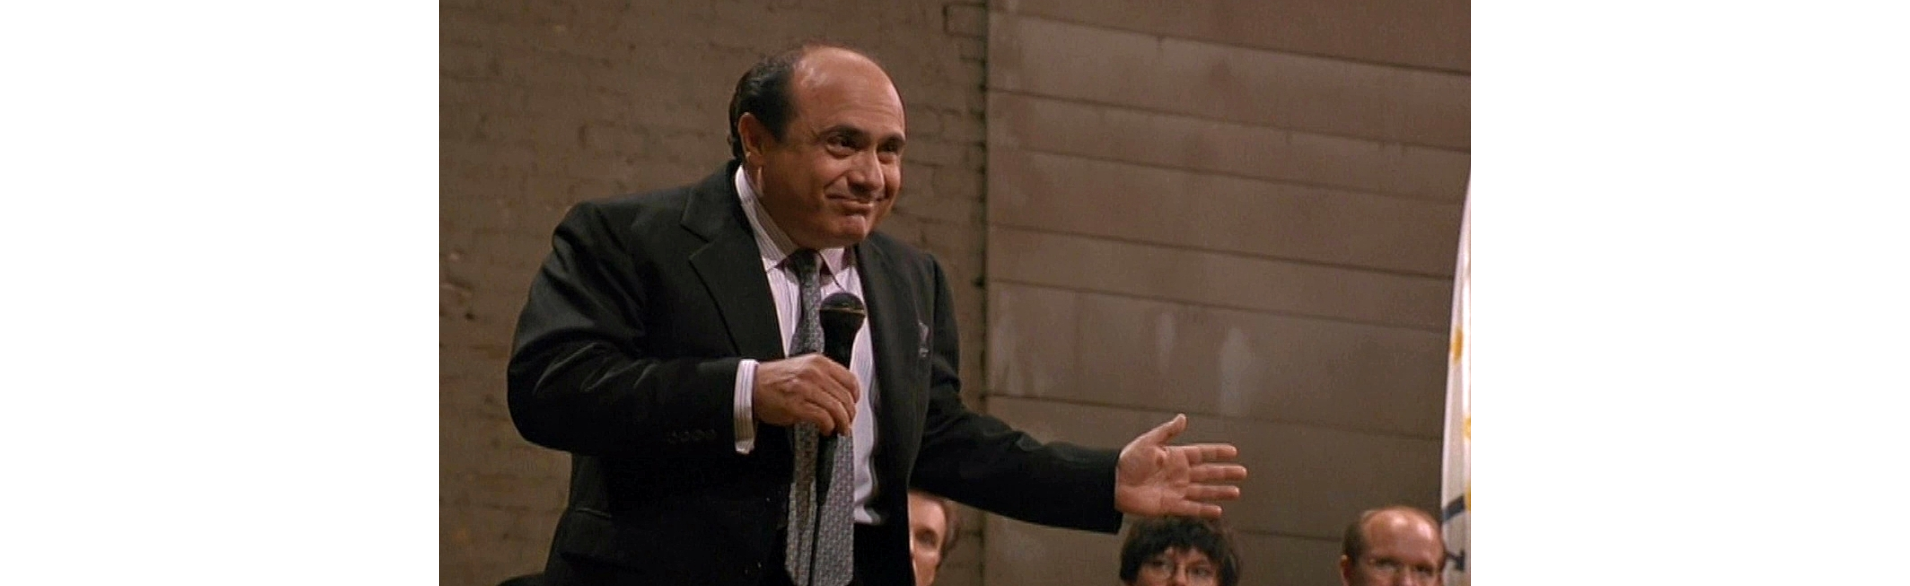 Larry the Liquidator (Danny Devito) in the 80' classic, Other People's Money